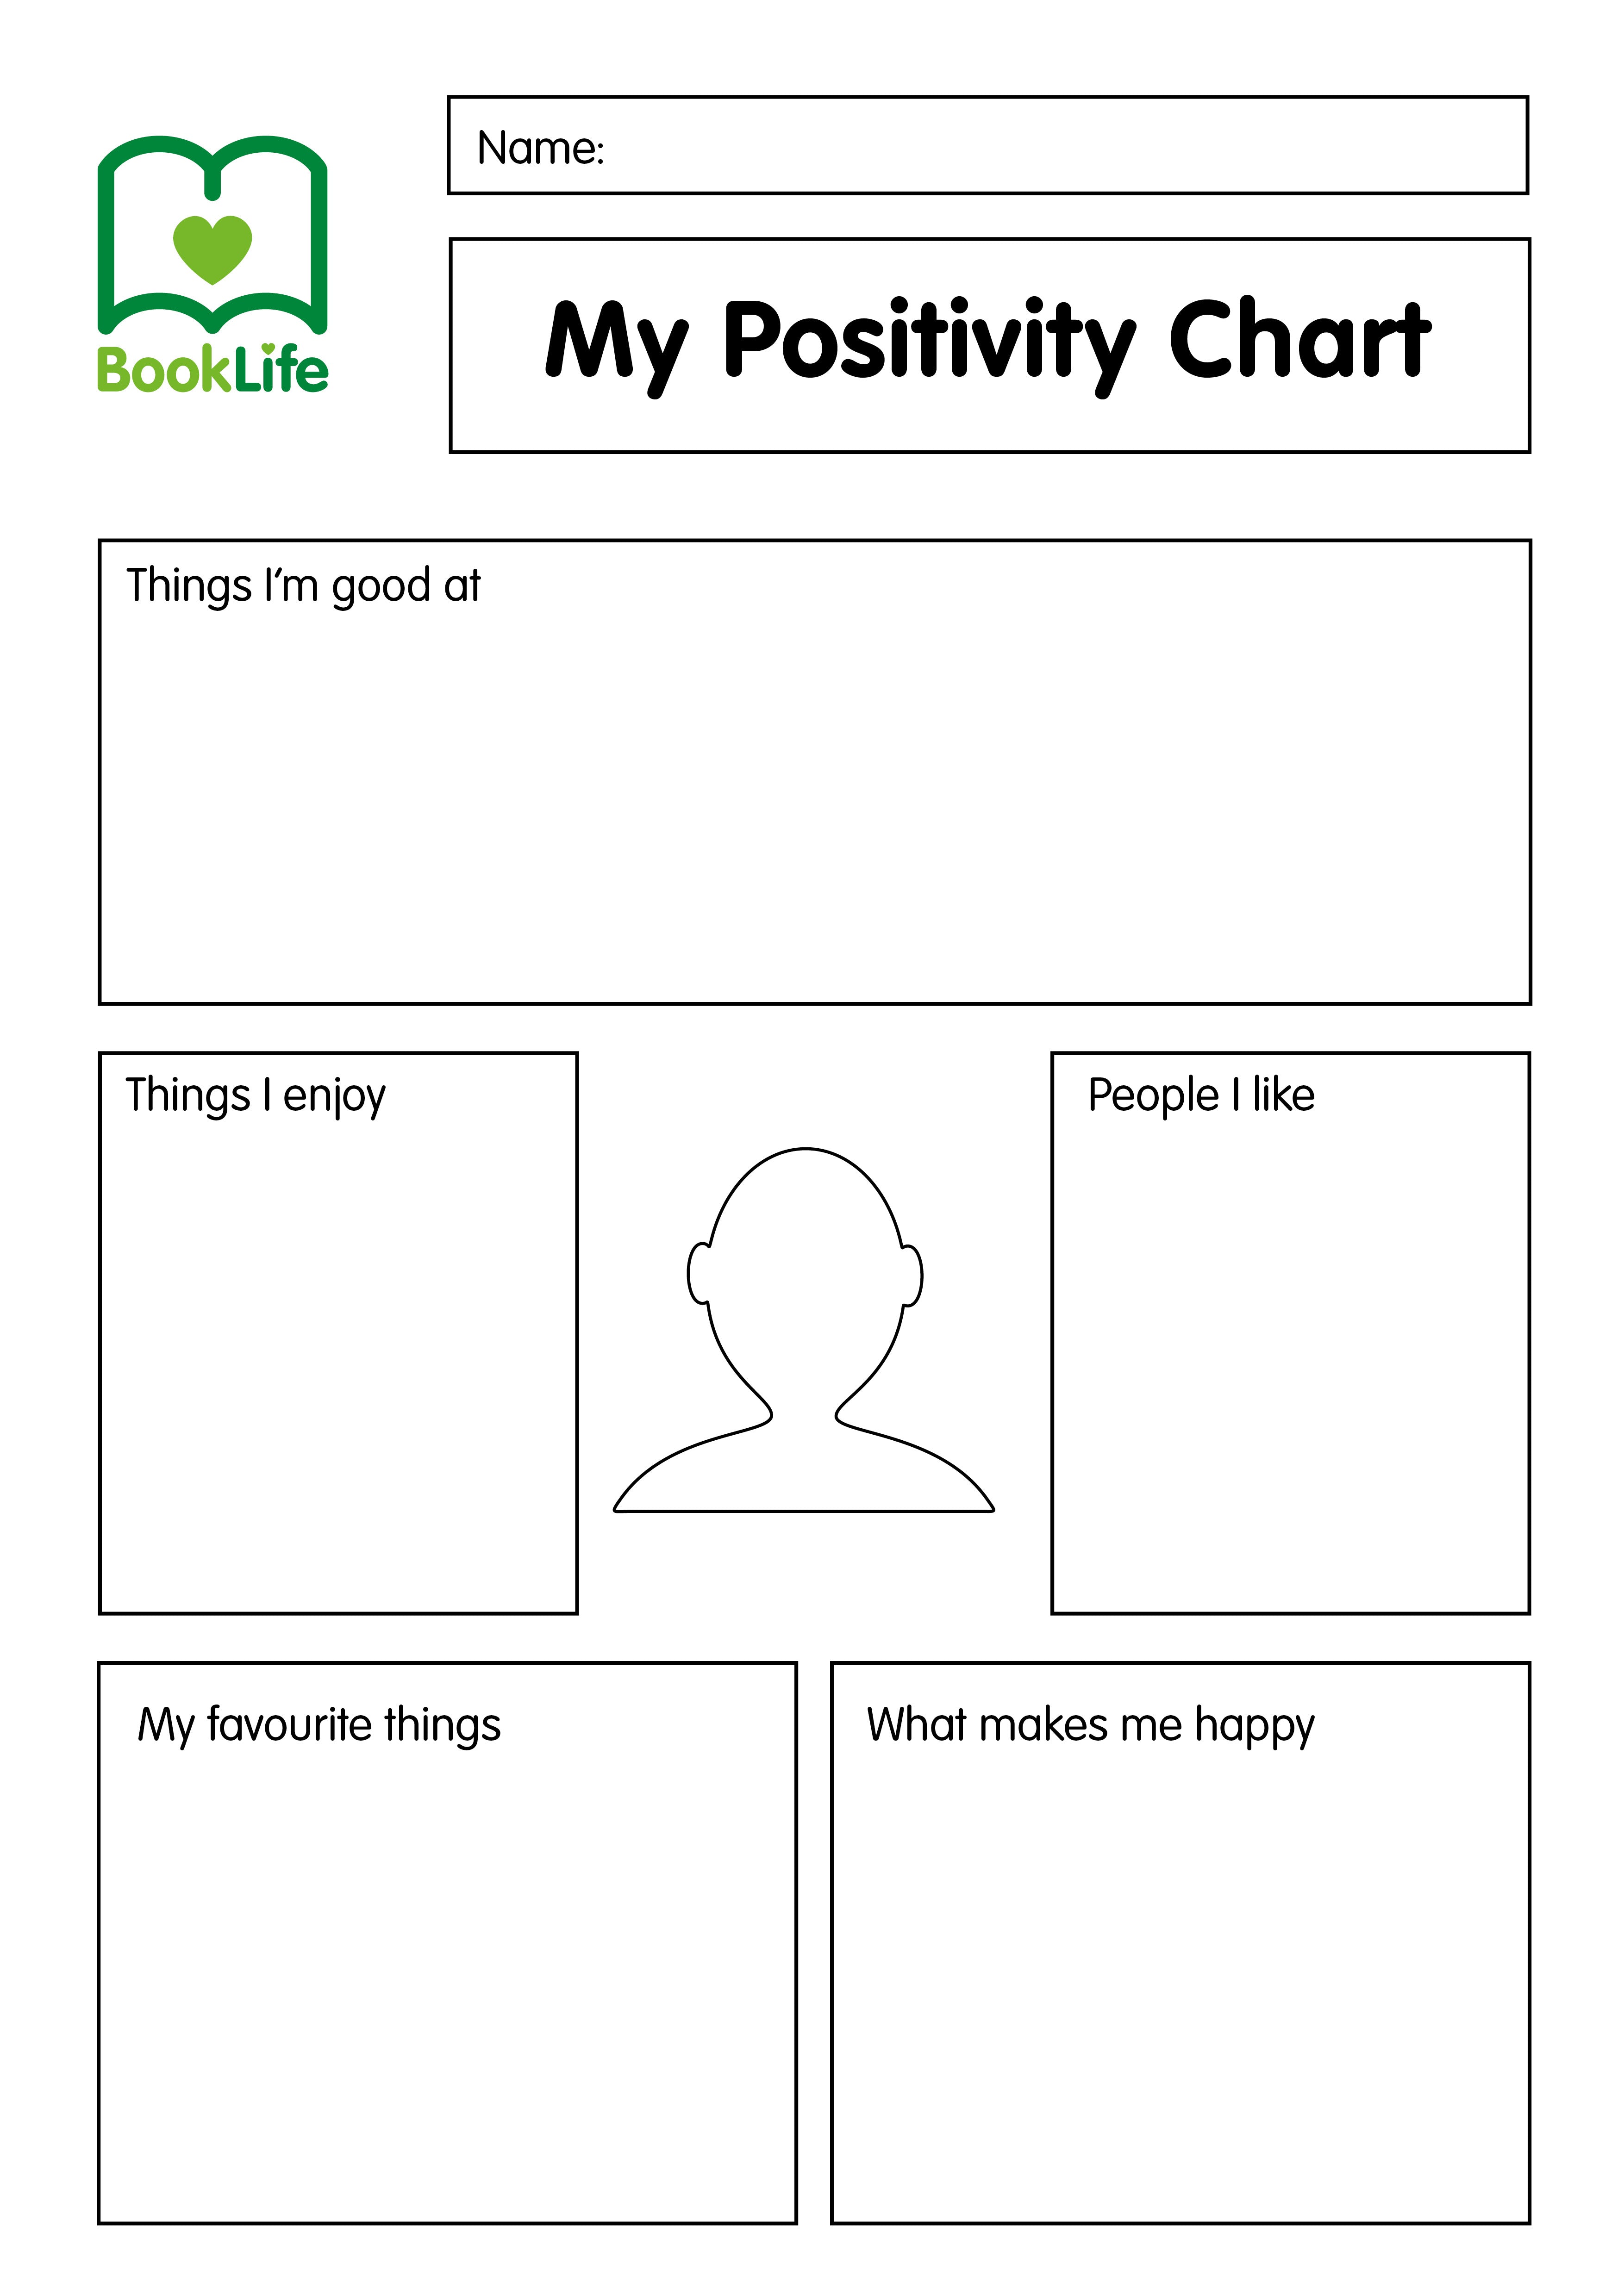 Free My Positivity Chart by BookLife